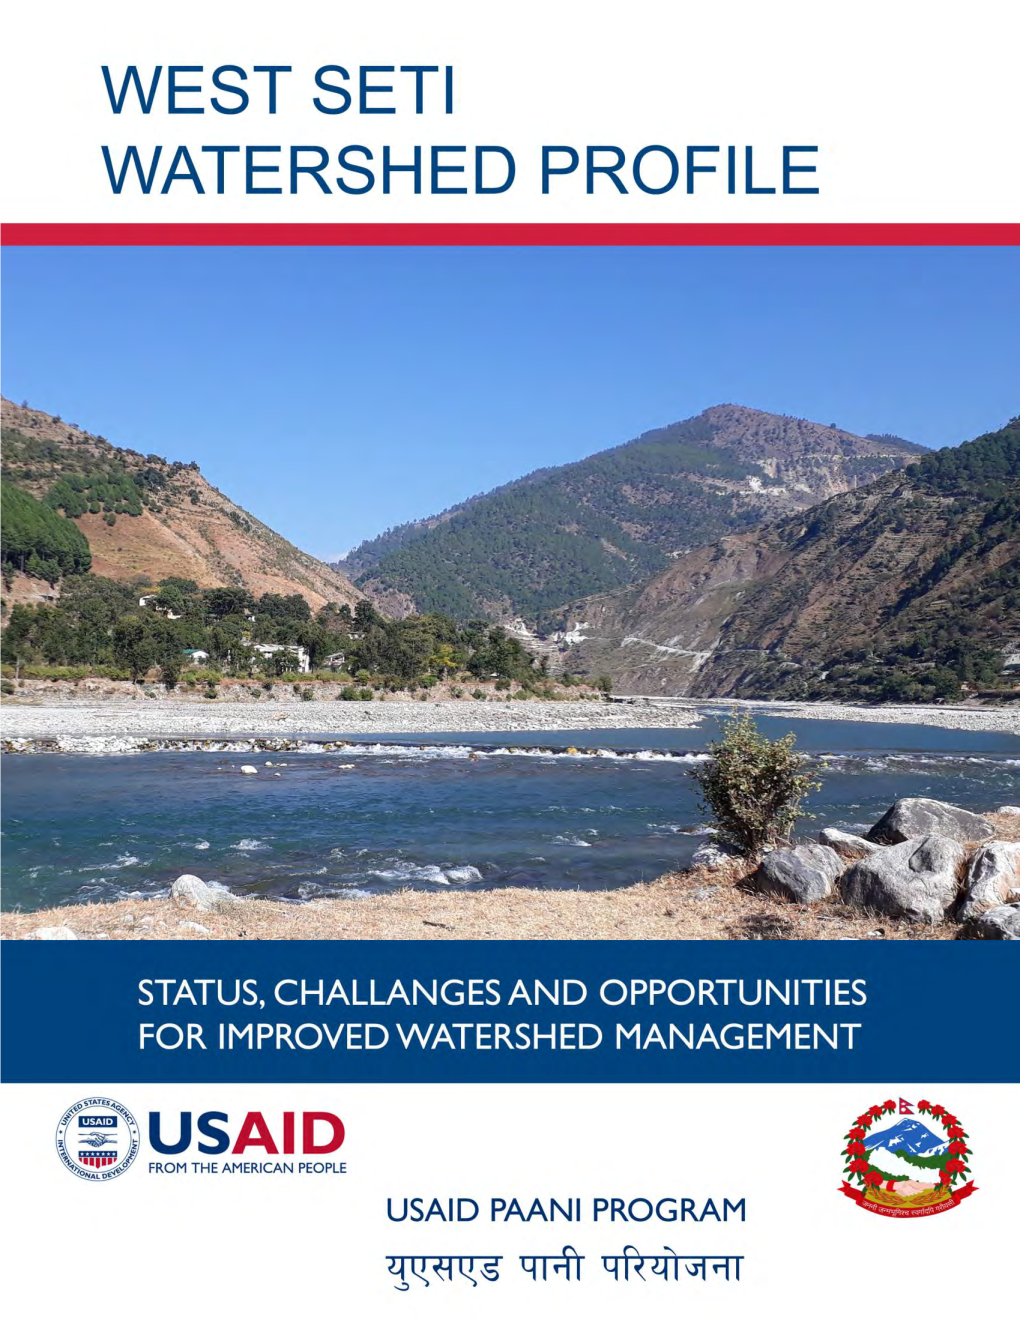 West Seti Watershed Profile - Draft for Discussion West Seti Watershed Profile: Status, Challenges and Opportunities for Improved Water Resource Management